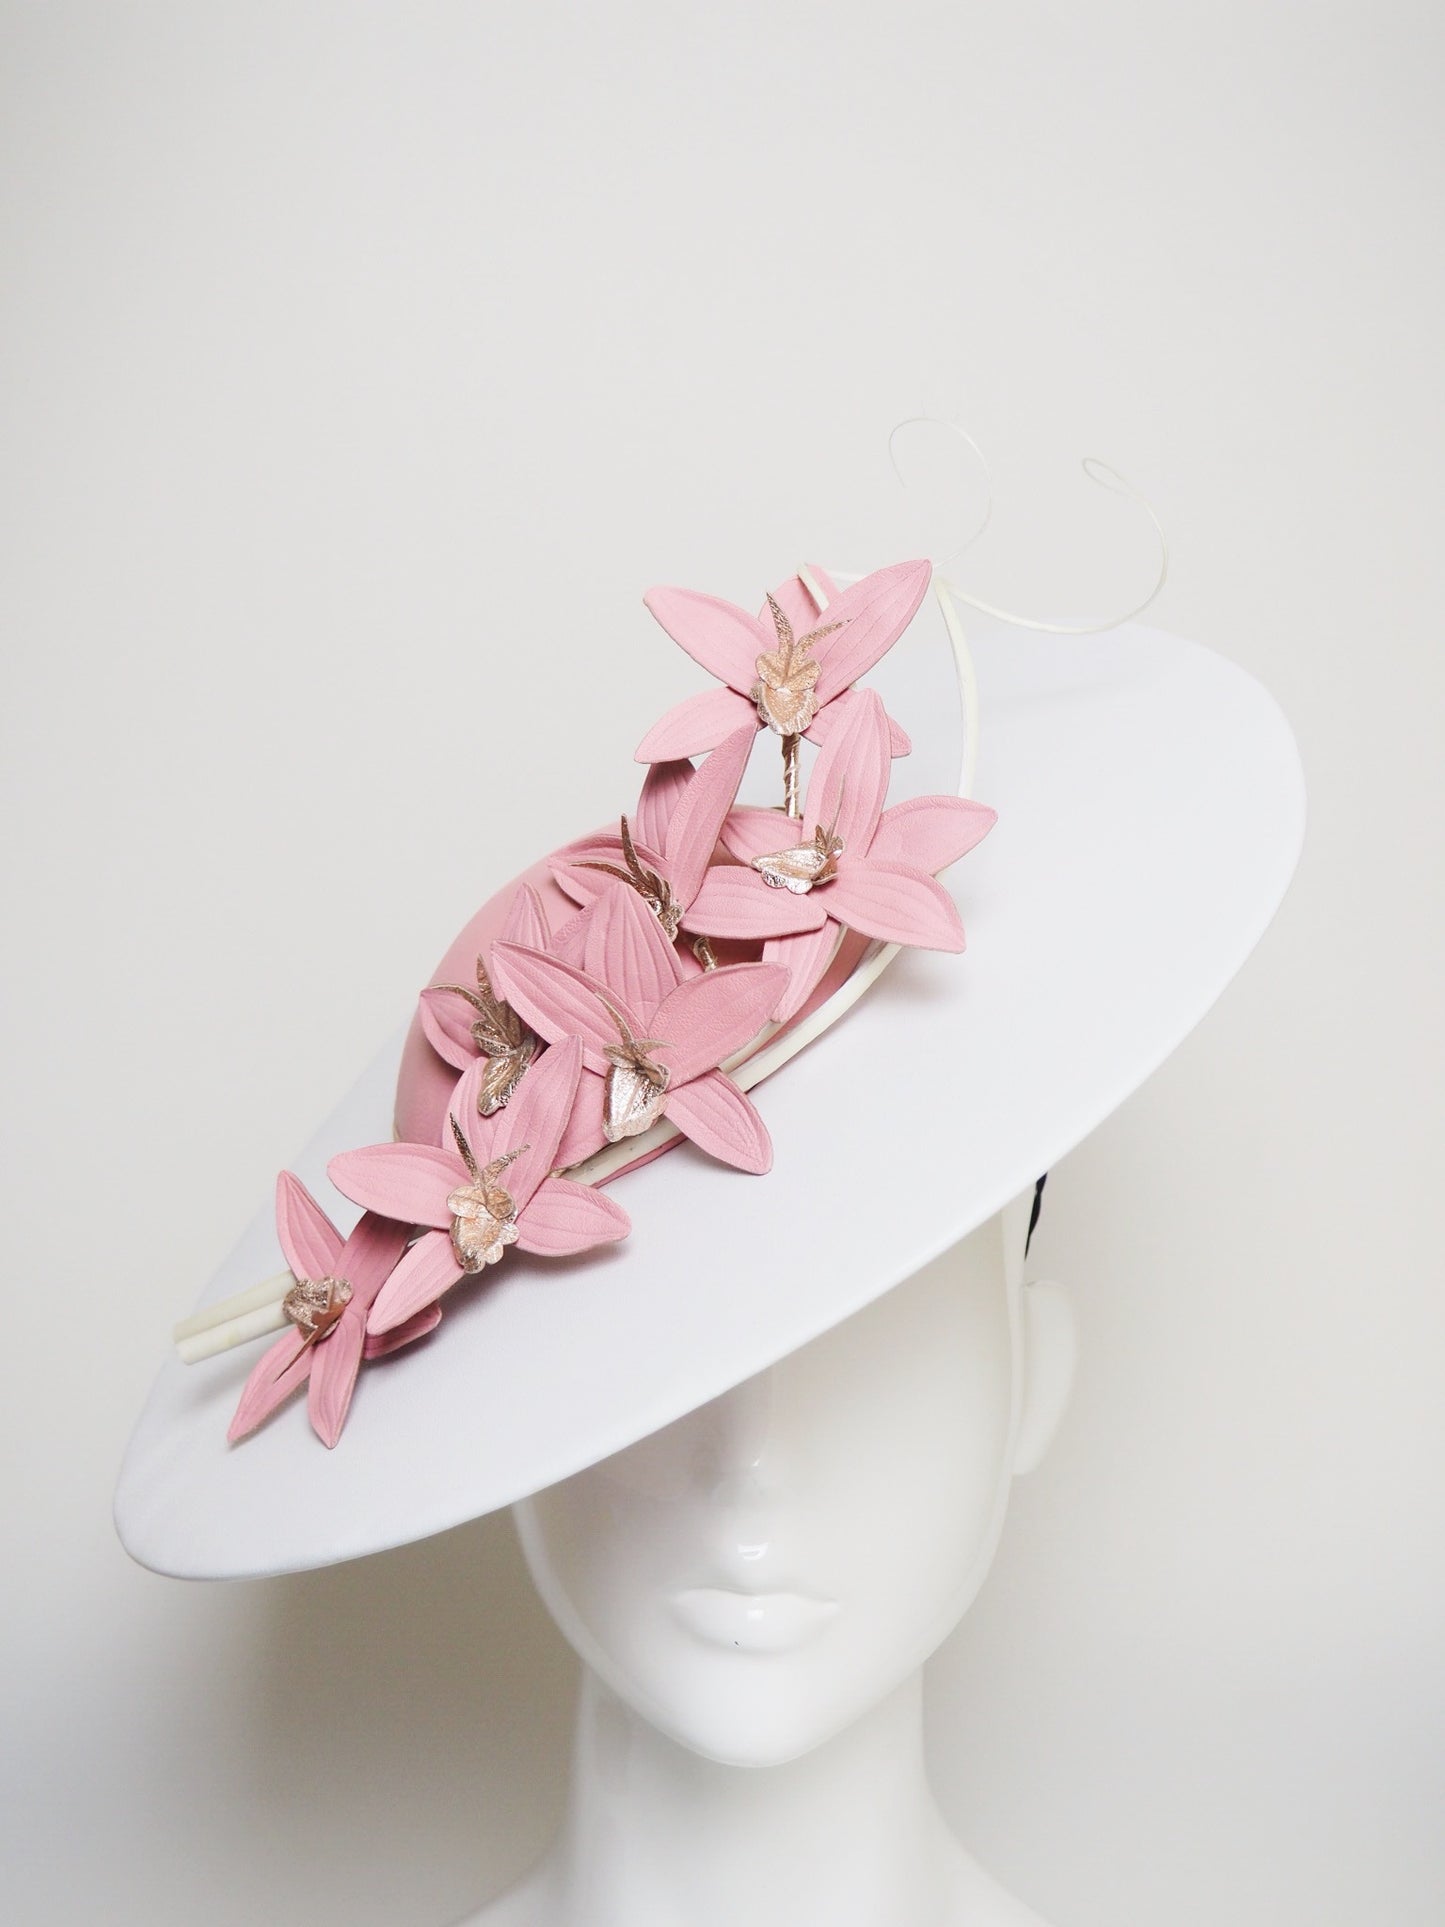 Candy Stripe - Candy pink and white broad brimmed hat